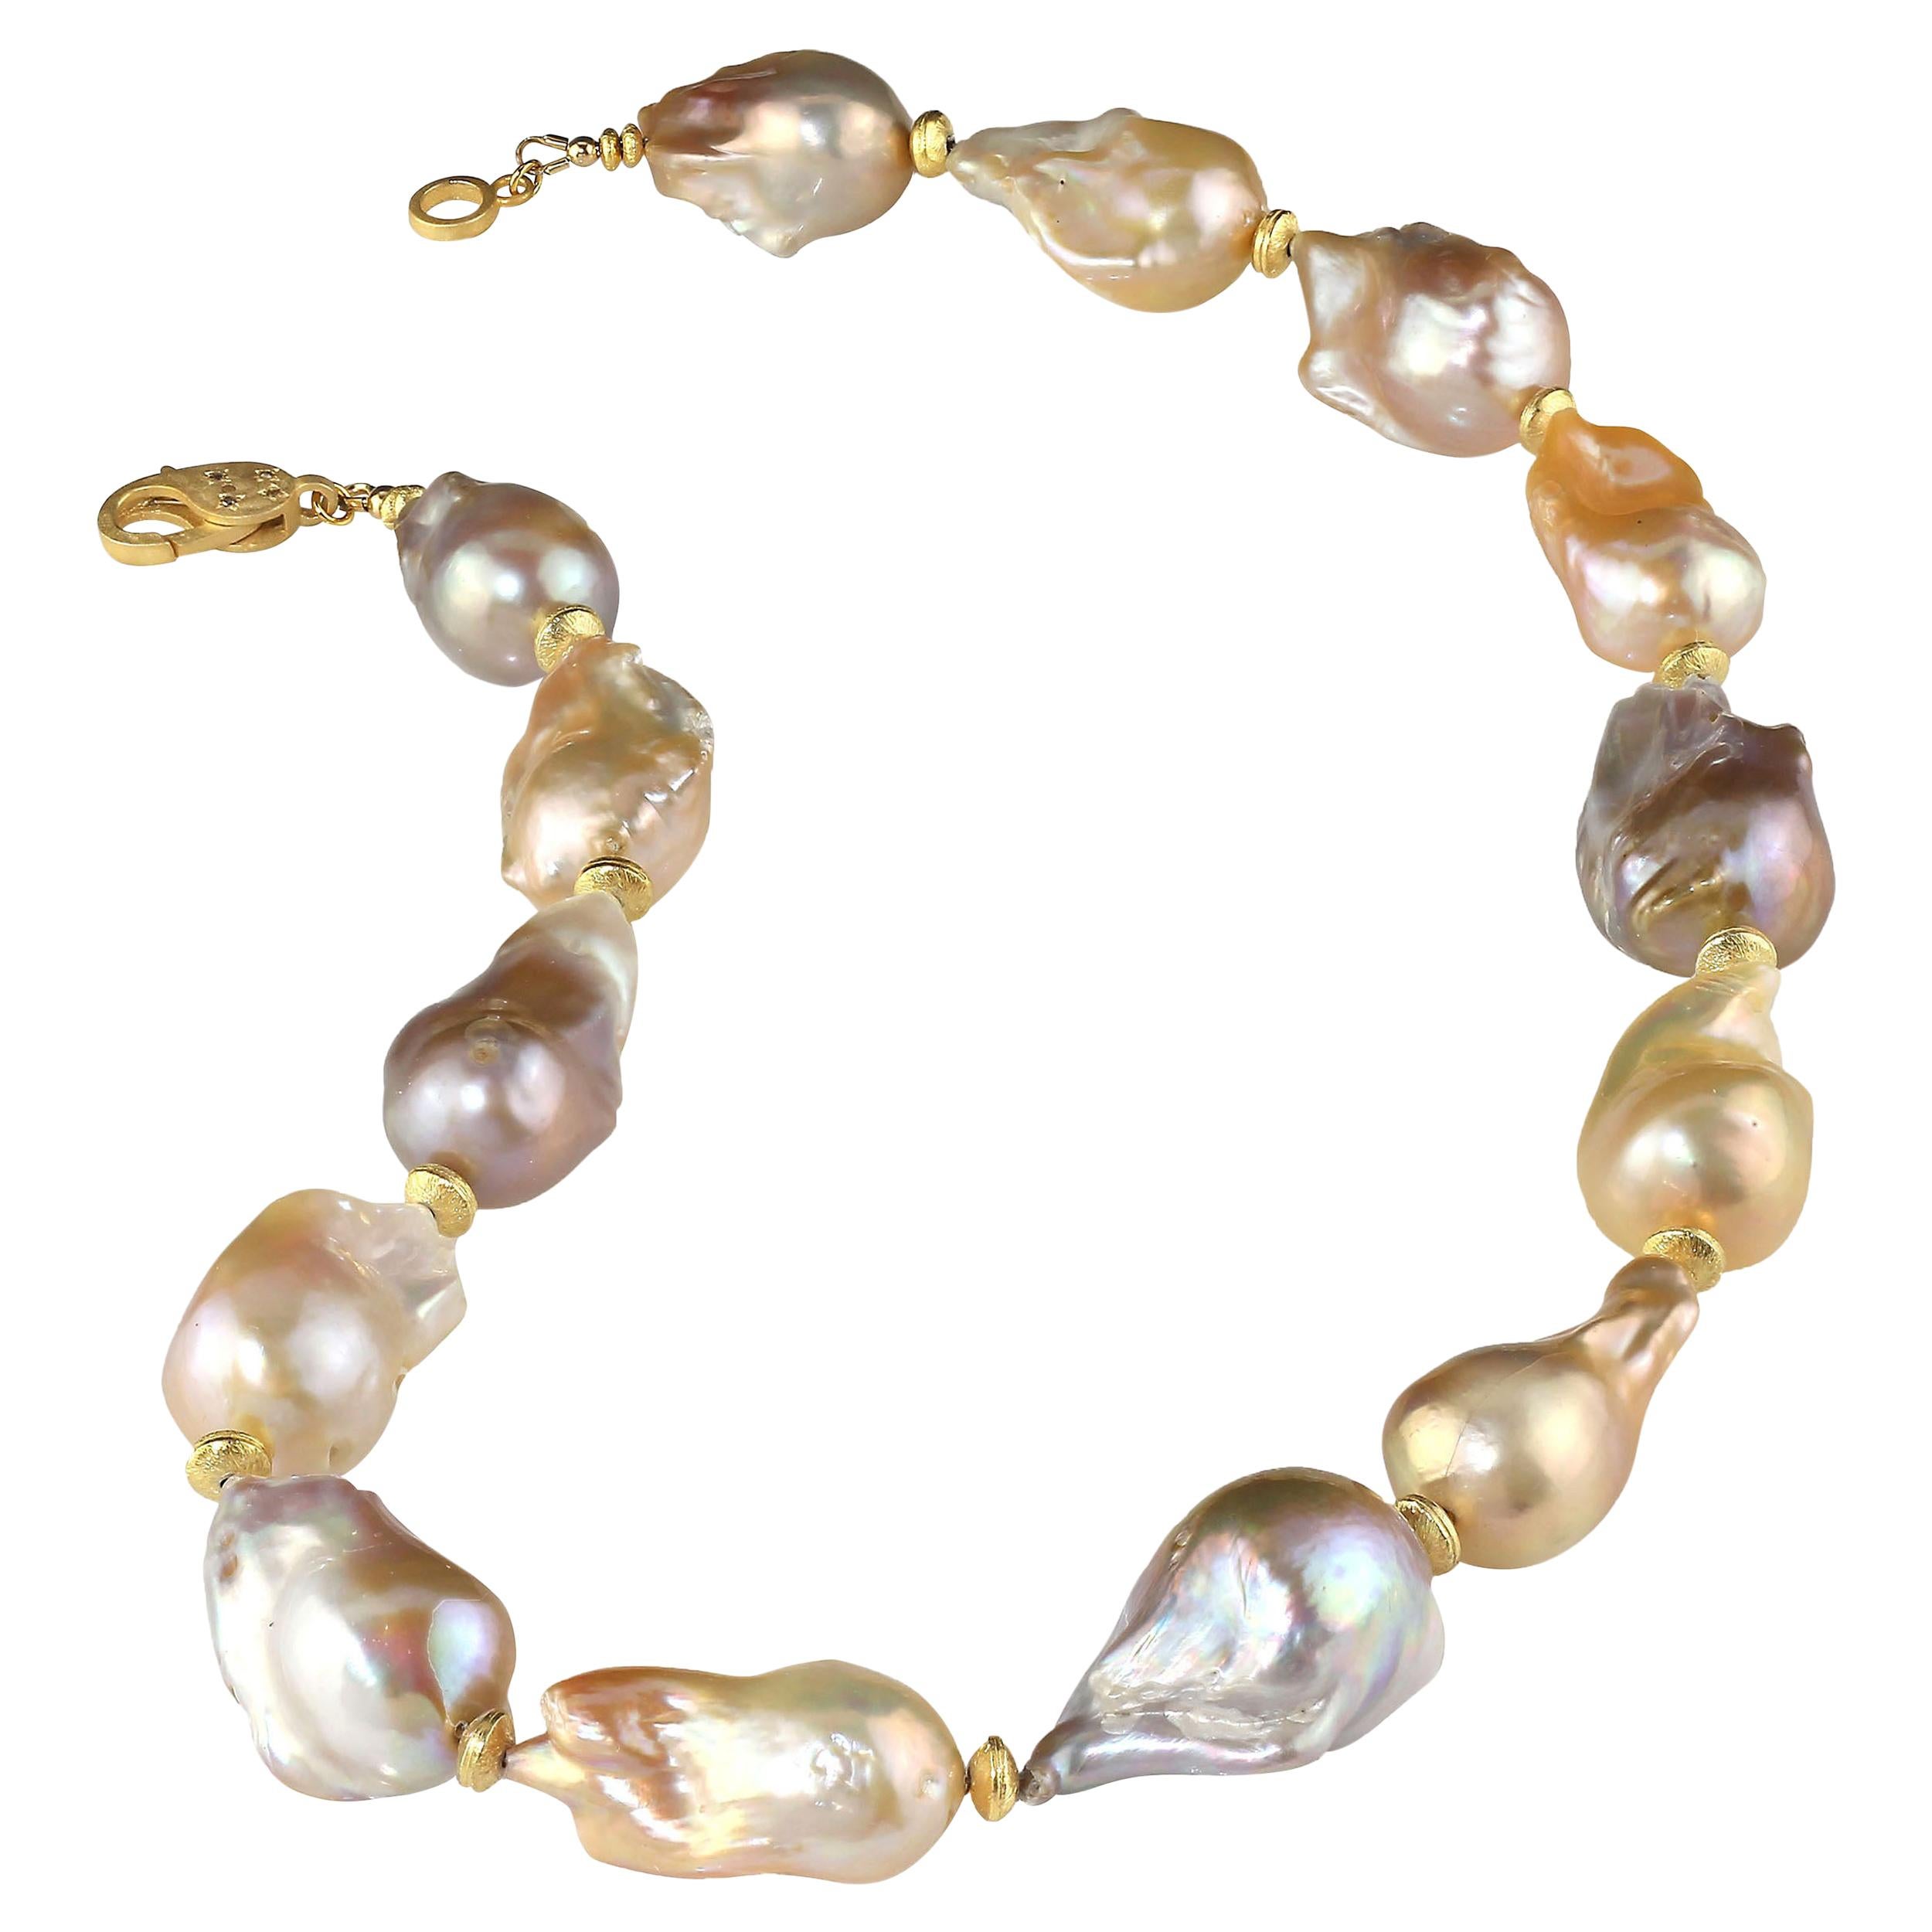 'Because you deserve to own Pearls'

Necklace of luscious, lustrous natural multi tone Baroque Pearls with gold accents. These huge, 30 x 18 MM, Baroque Pearls are gorgeous and complement all skin tones. This unique necklace features a vermeil (gold